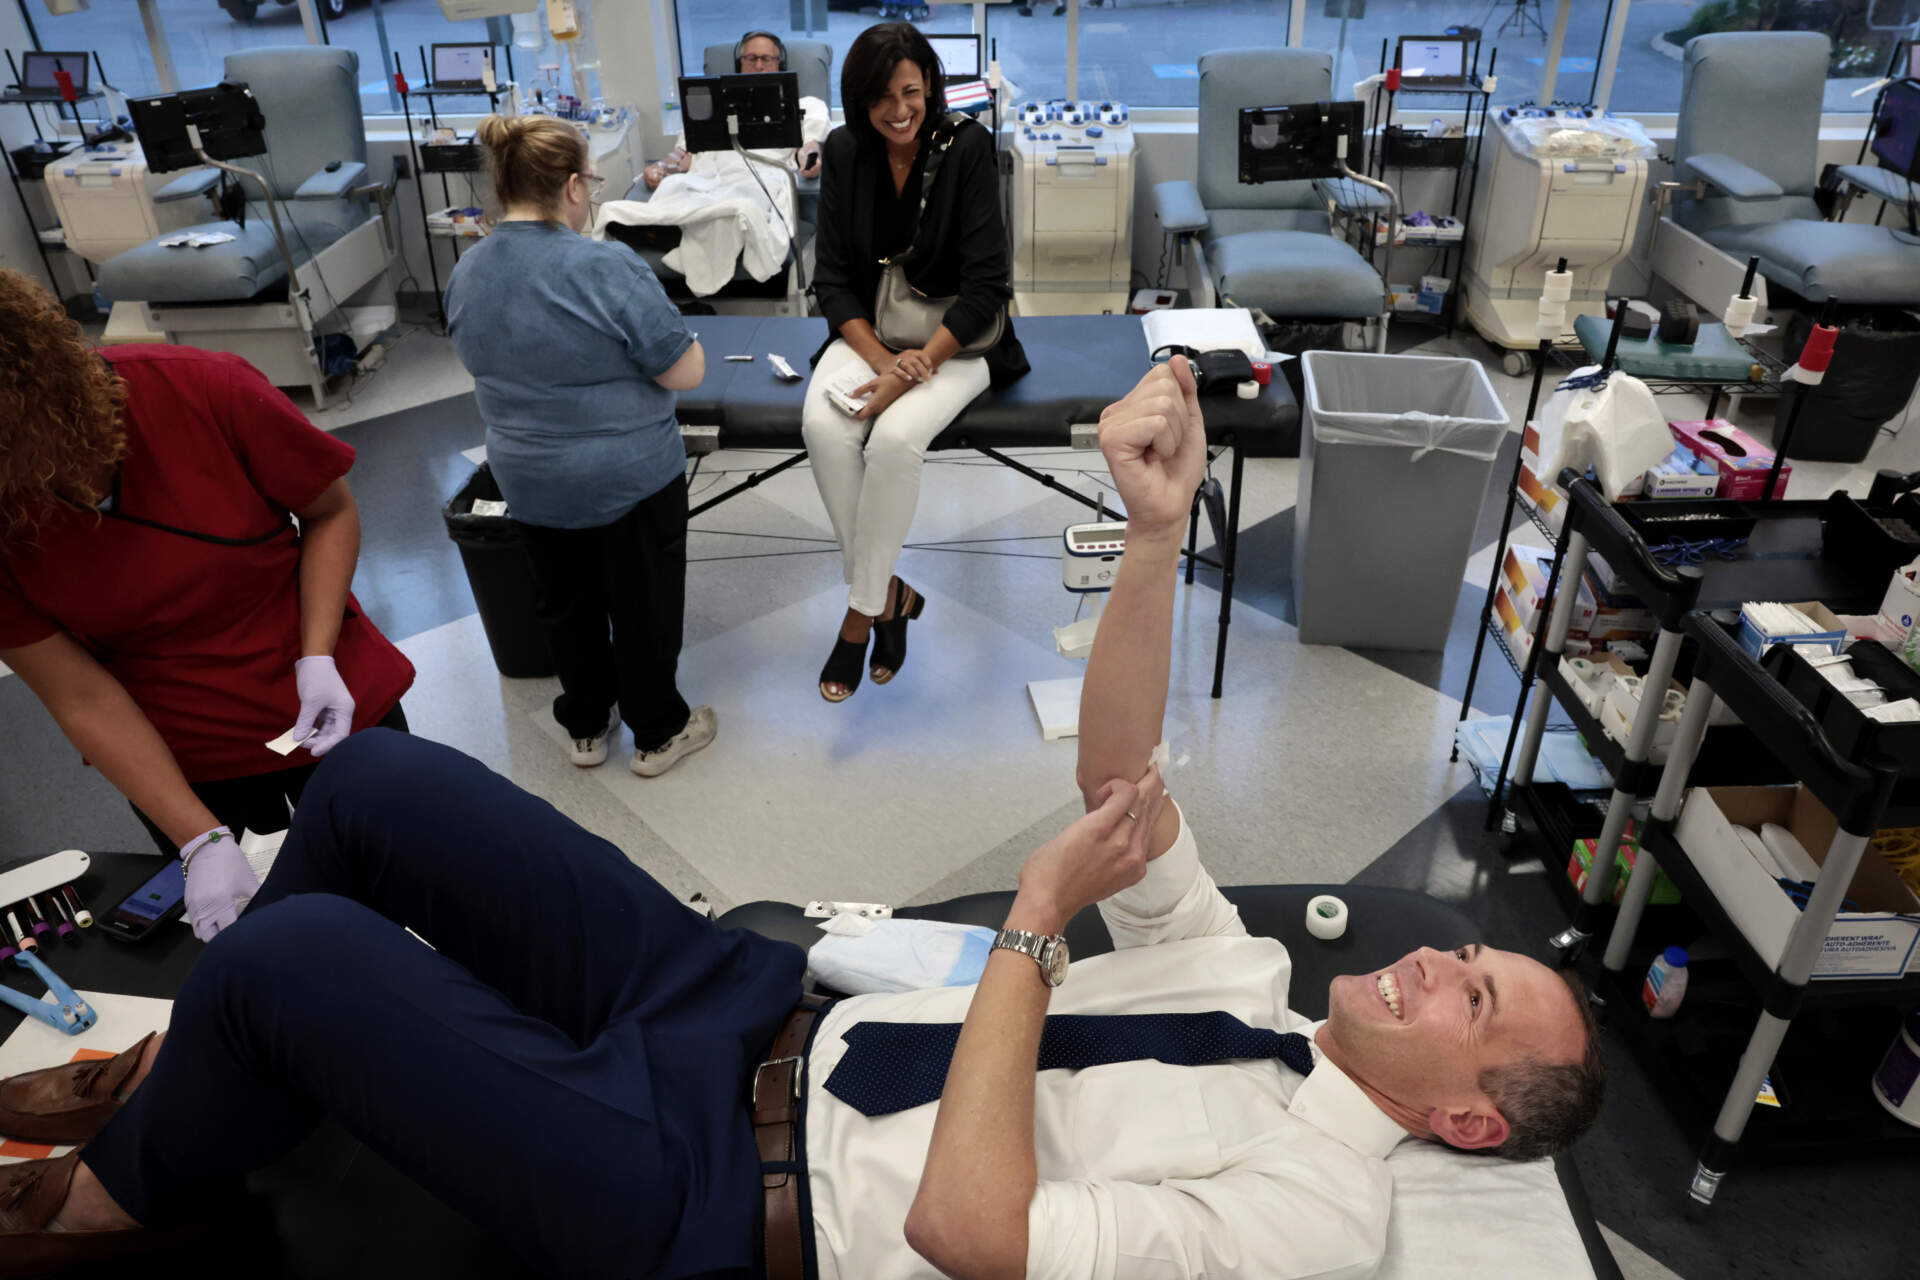 Dr. Robbie Goldstein, front, and Dr. Rochelle Walensky, seated, chat after donating blood at the American Red Cross Blood Donation Center on August 29th, 2023. (Craig F. Walker/The Boston Globe via Getty Images)